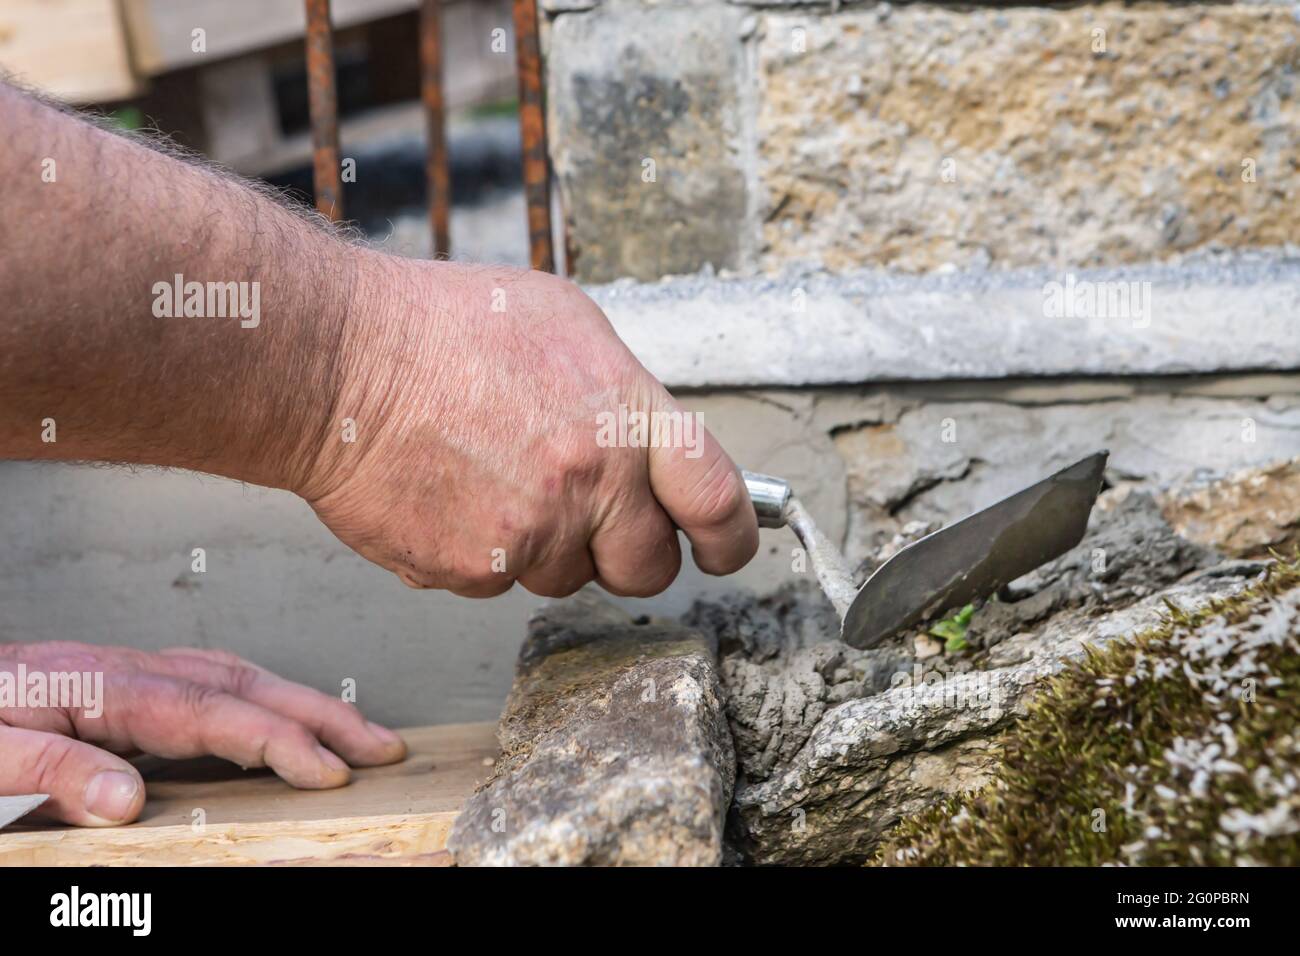 A person processing concret cement on a do it yourself garden project Stock Photo